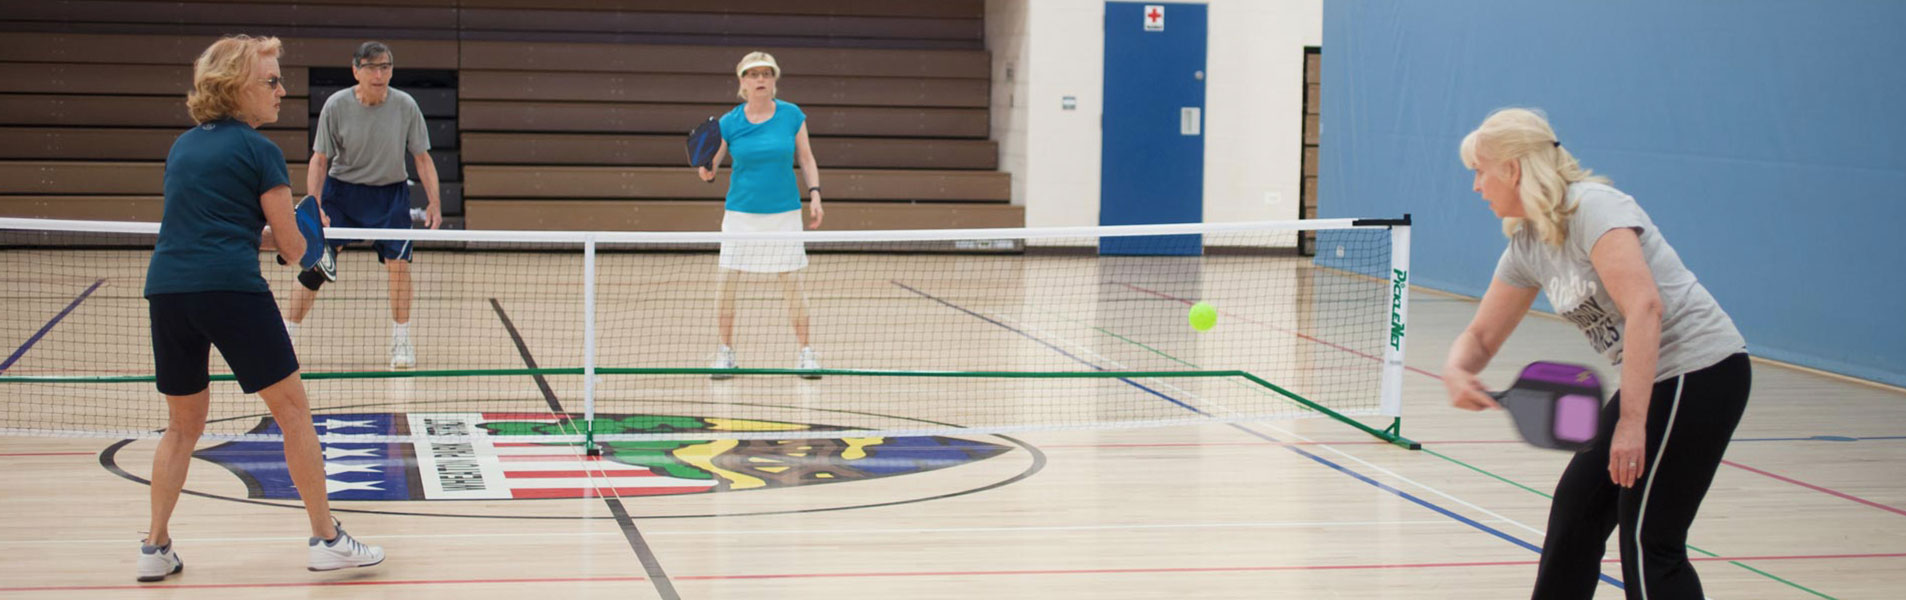 Group of people playing indoor pickleball